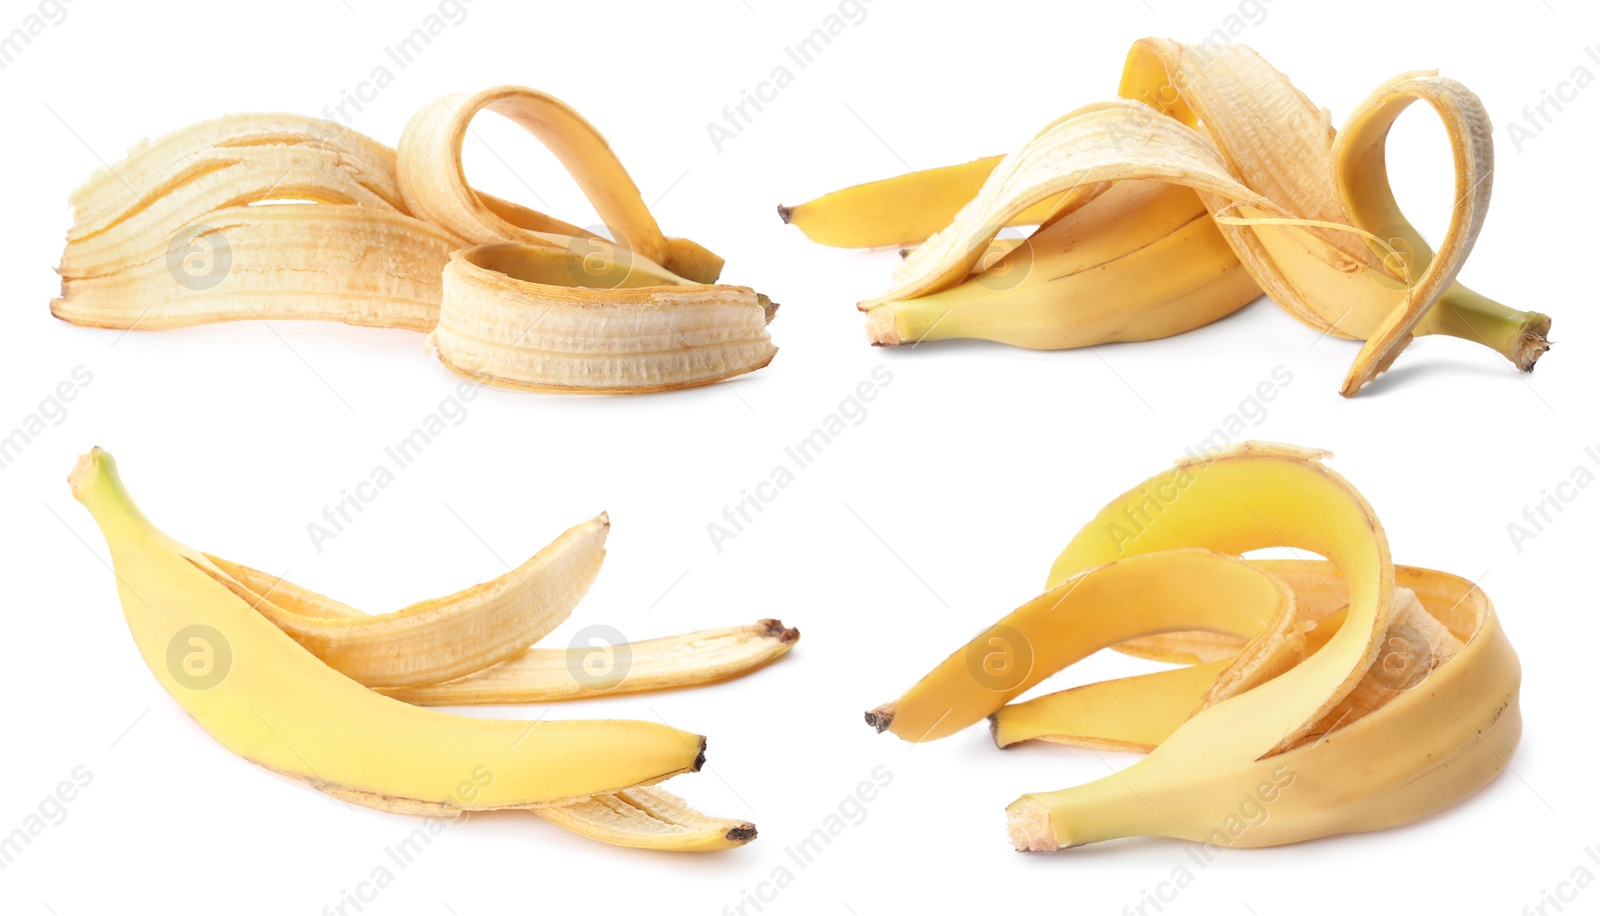 Image of Banana peels on white background, collage. Composting of organic waste